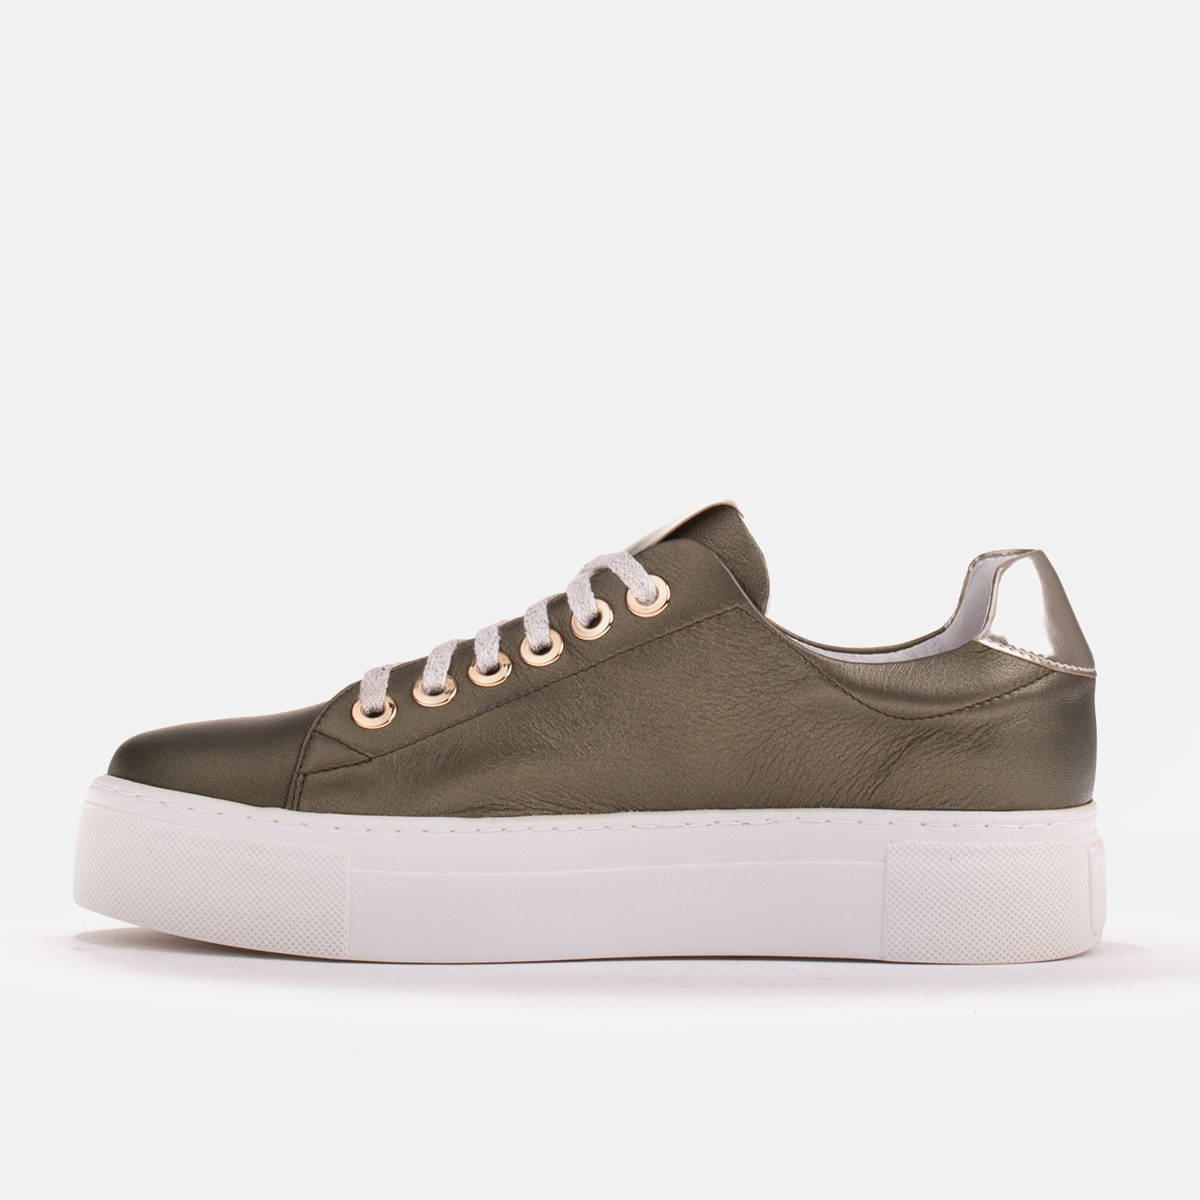 Women's sneakers made of genuine leather on a thick sole